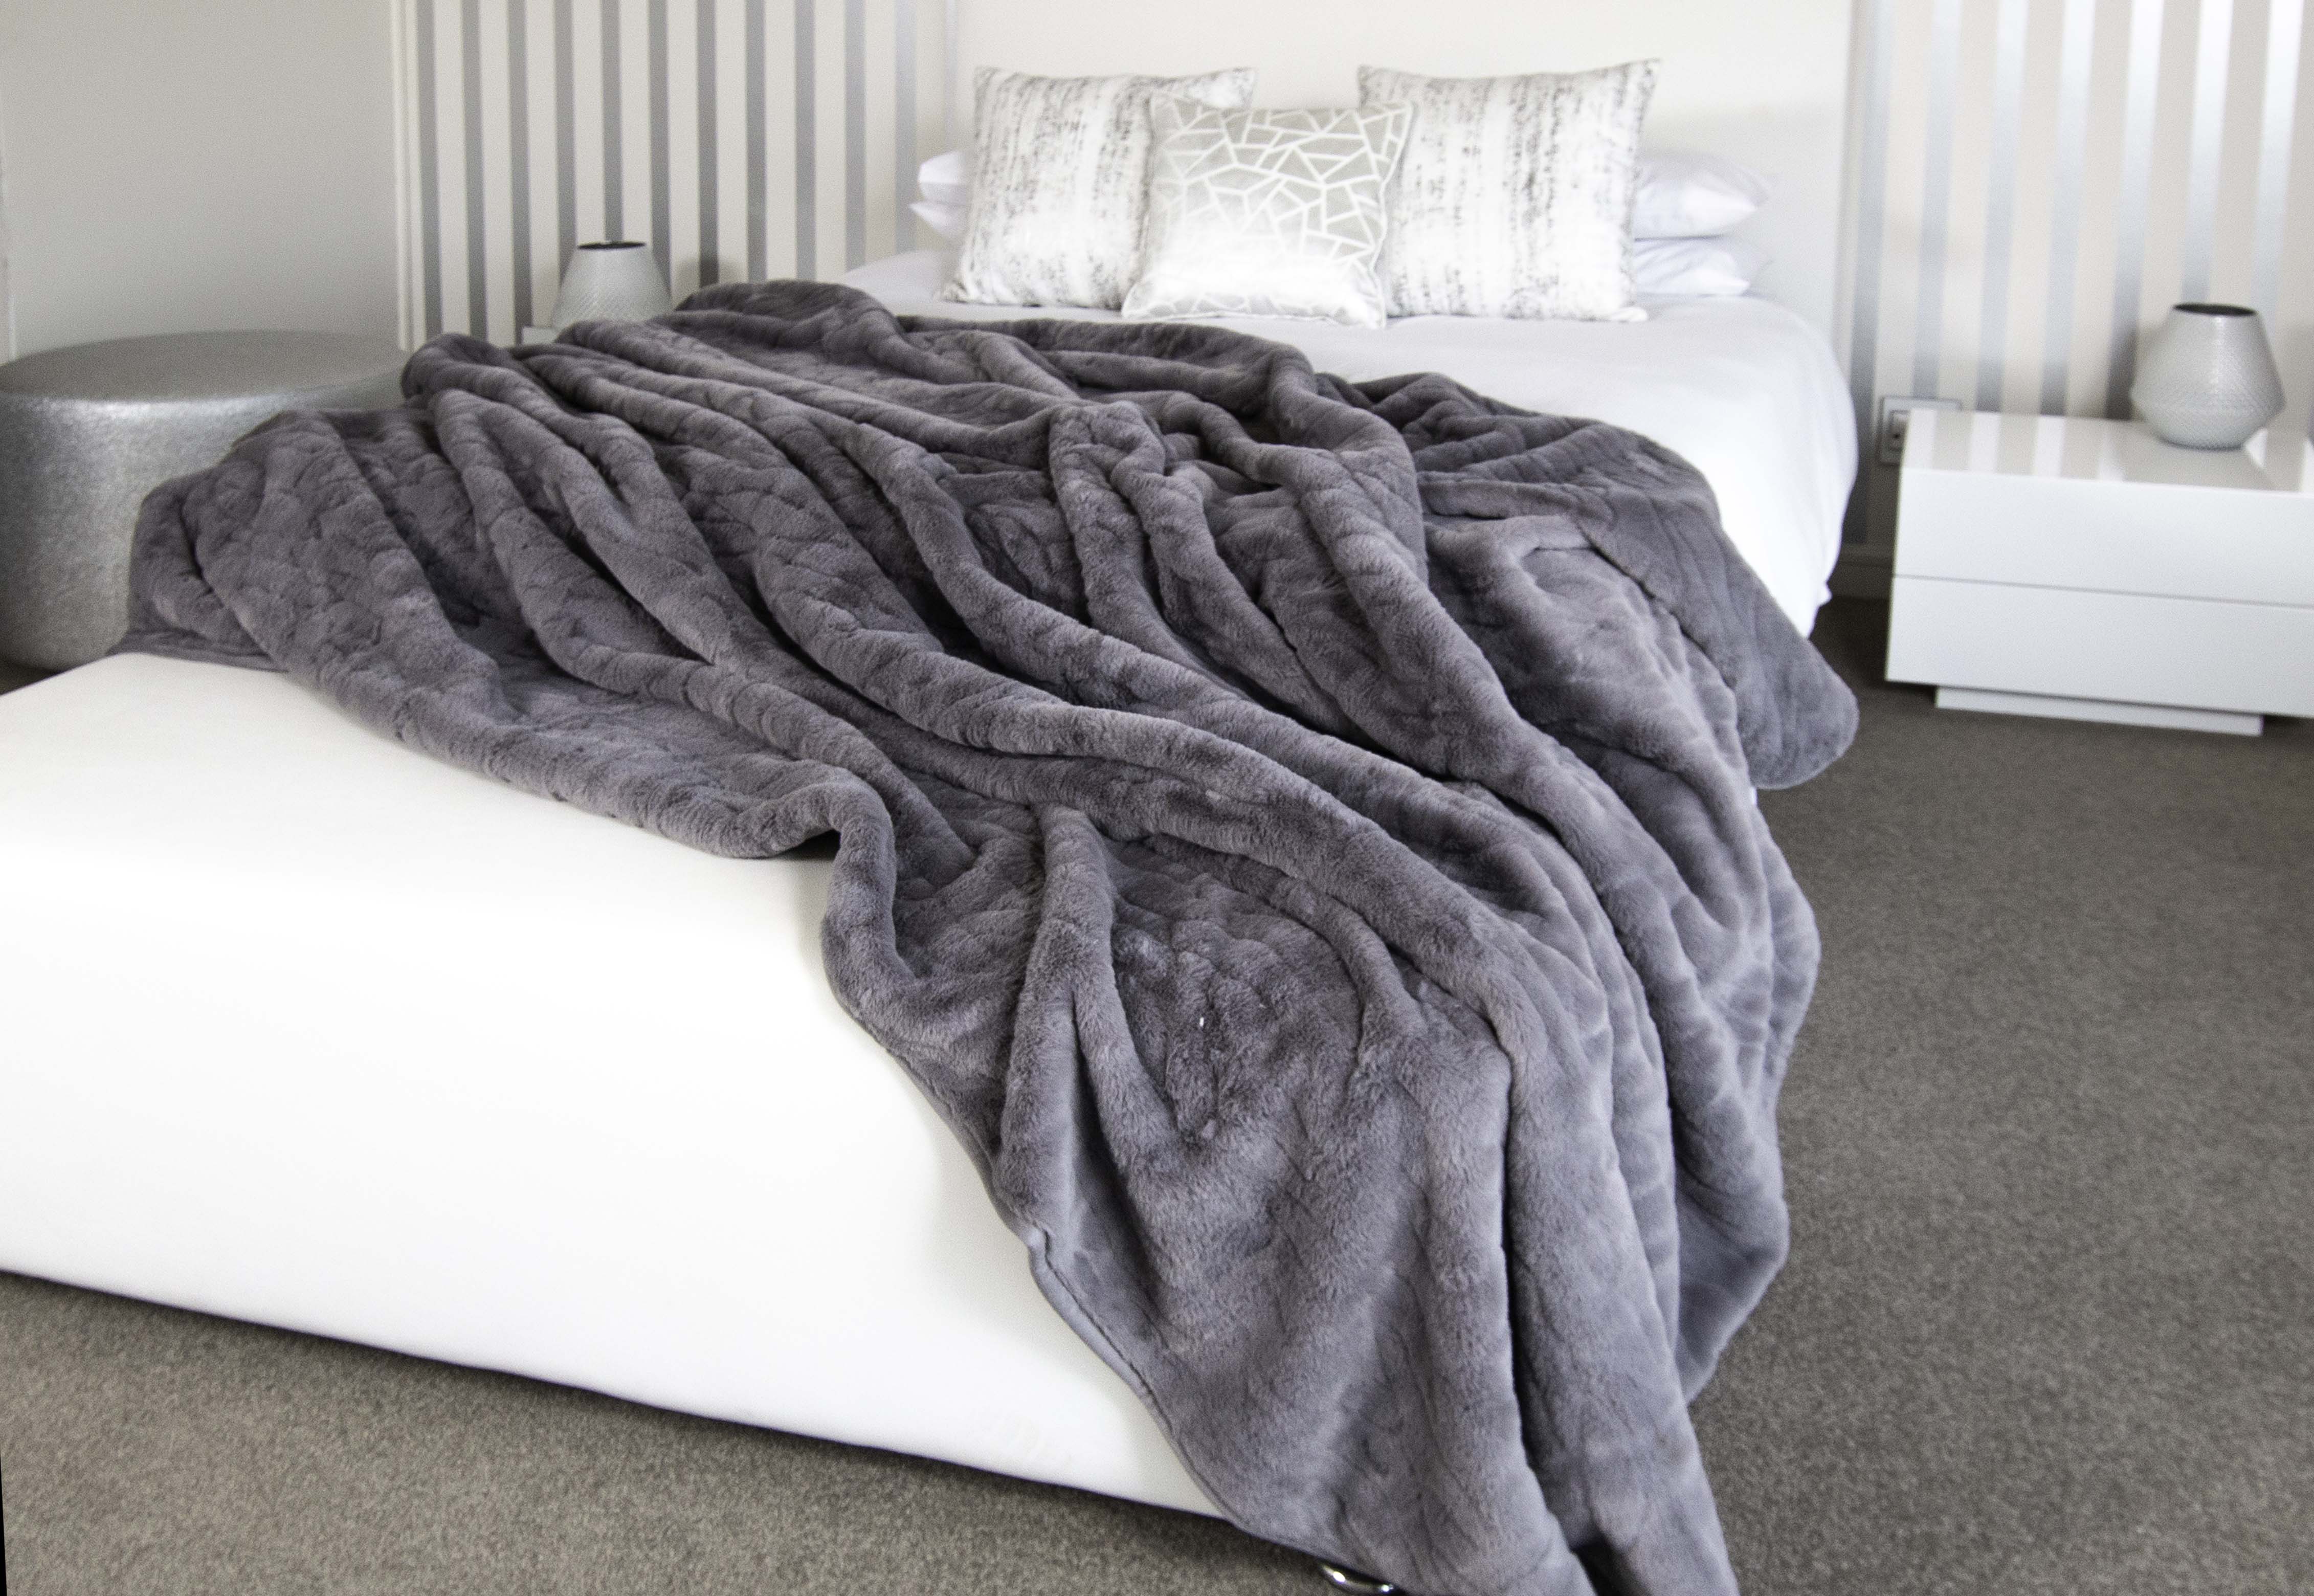 This blanket is the perfect size for you and your family, measuring in at 220x240 and available in Plain colours the Cleopatra Super Soft Rabbit Fur Blanket will keep you warm this winter.